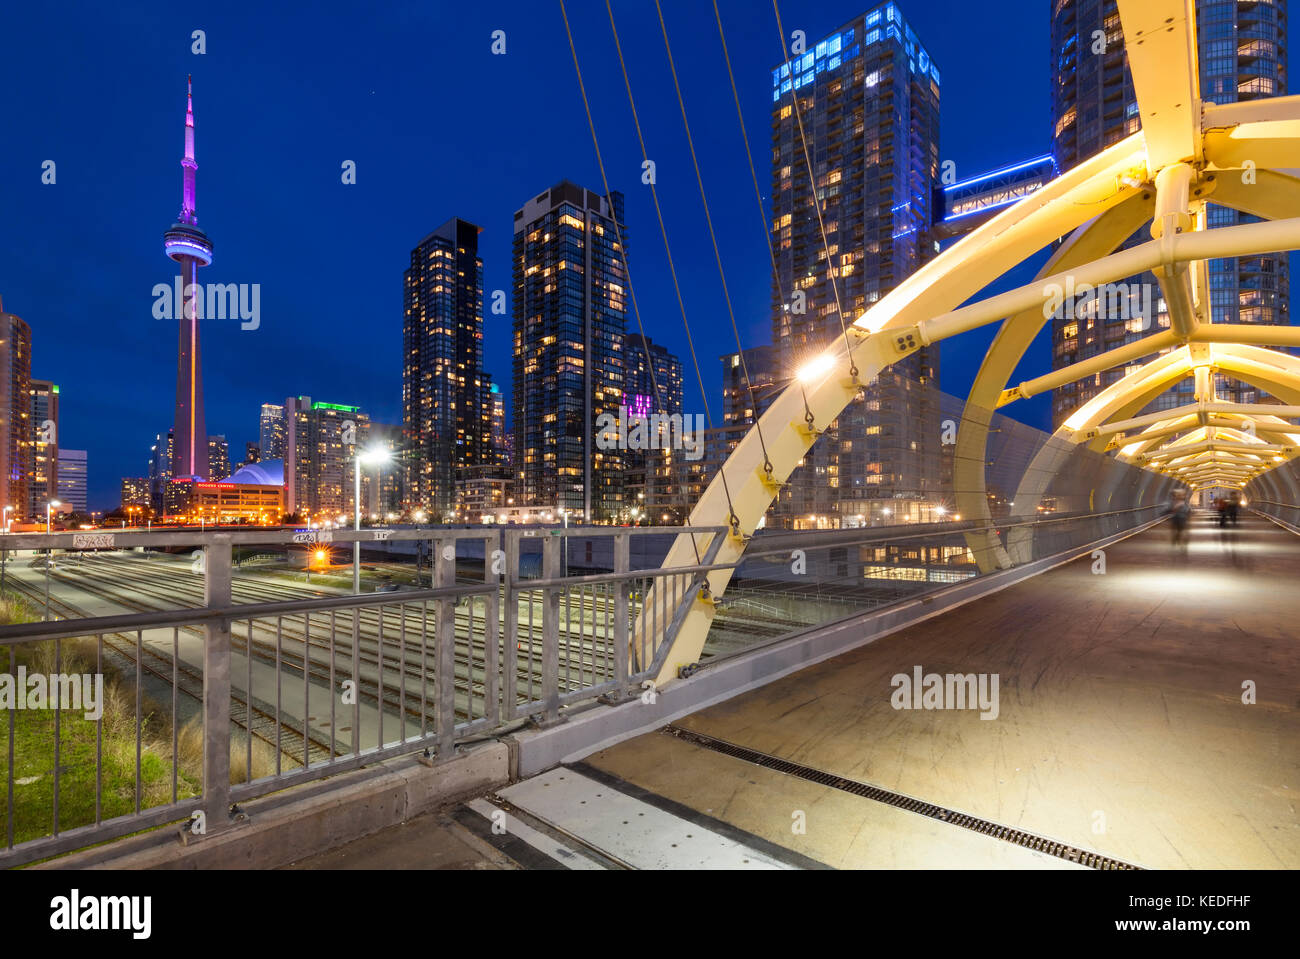 The Puente de Luz (bridge of light) bridge designed by Francisco Gazitua that connects Concord CityPlace to Front St with the Toronto skyline. Stock Photo